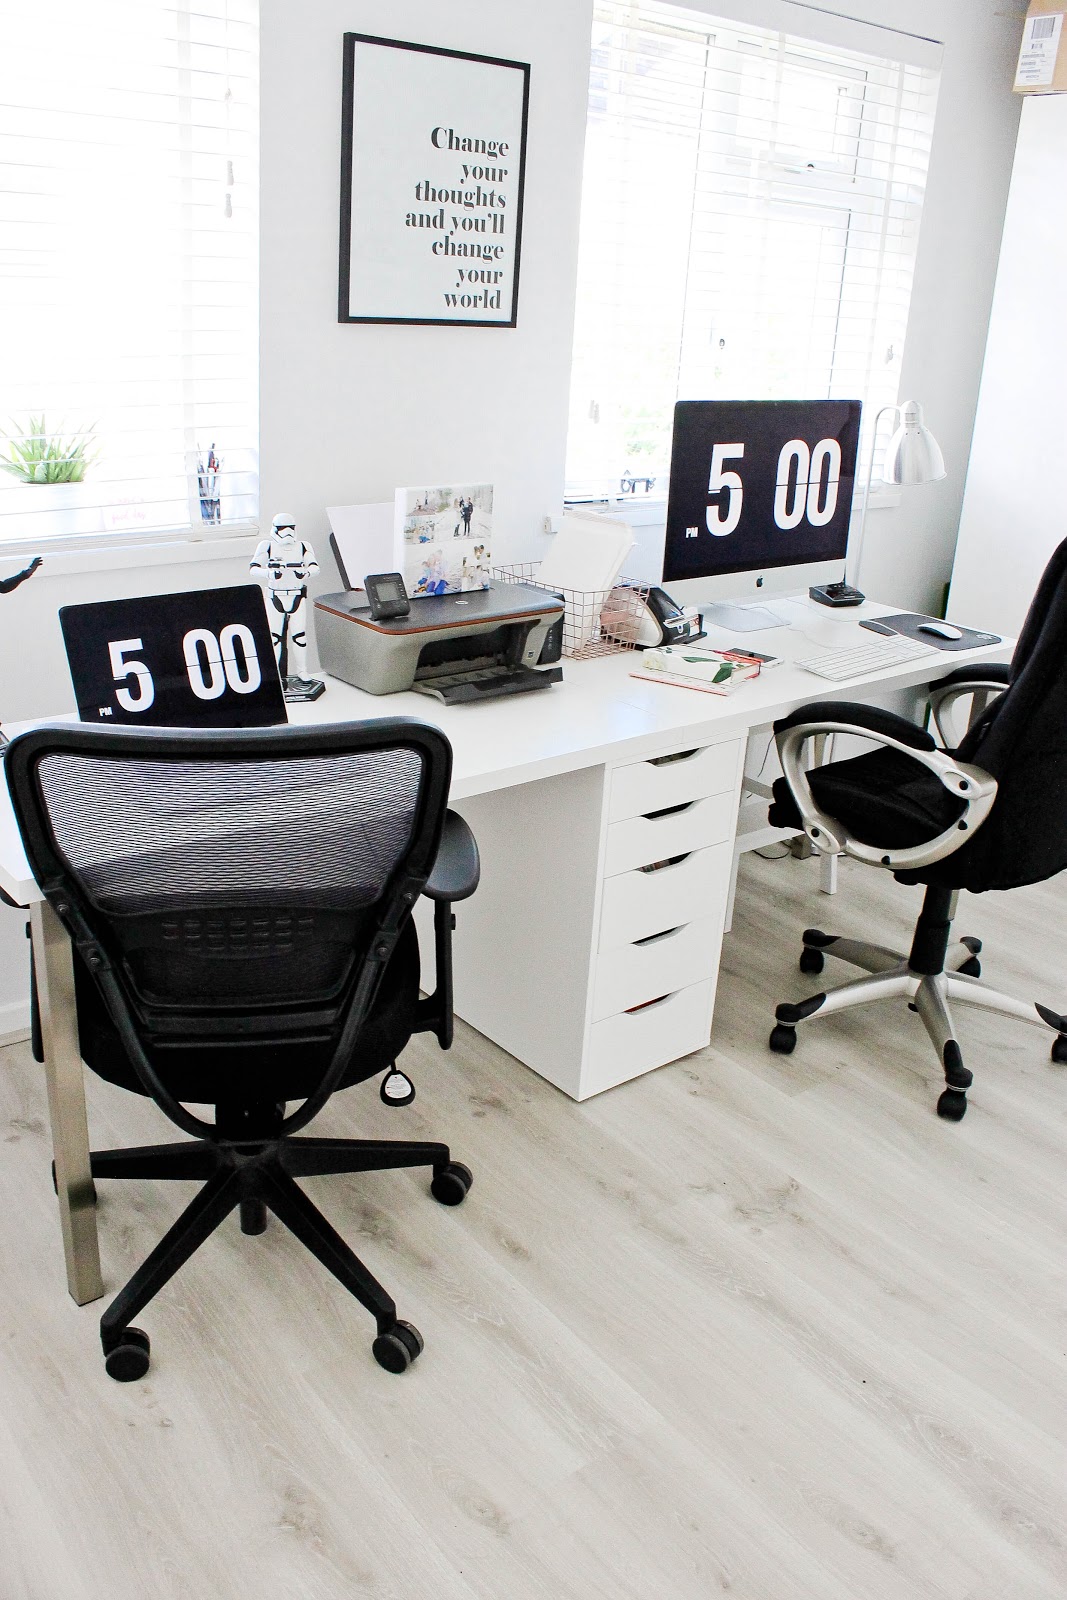 modern office, modern office desk, modern office chairs, ikea office, home office, home study, modern office interior, Scandinavian decor, Scandinavian interior, Scandinavian office furniture, lego display, lego lightsabers, office room tour, home interiors,